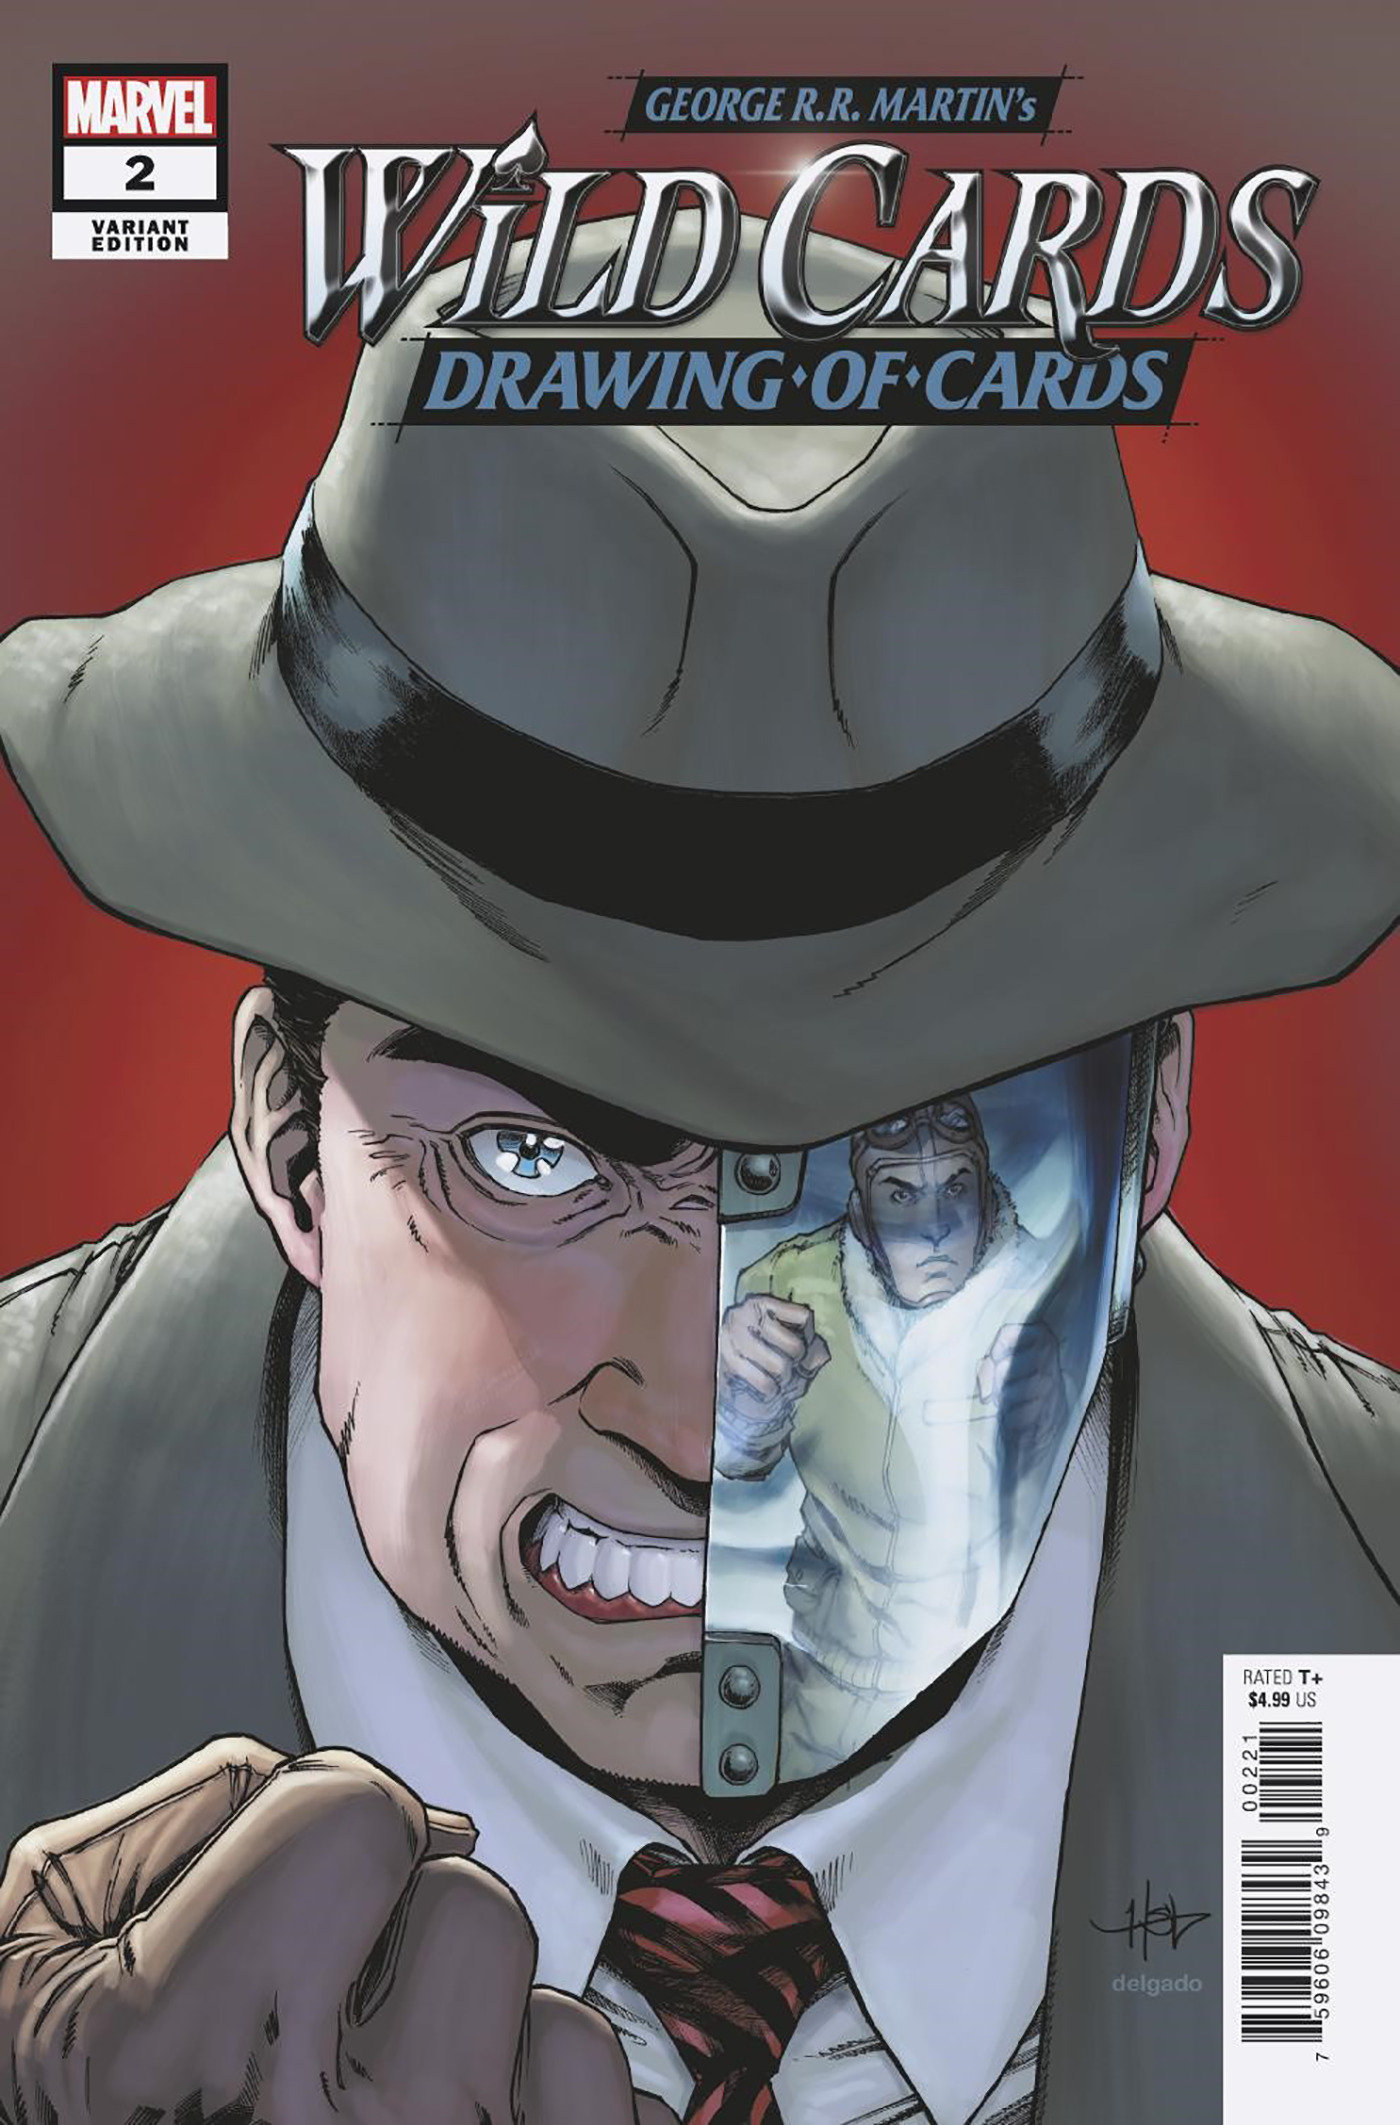 Wild Cards The Drawing of Cards #2 Creees Lee Variant